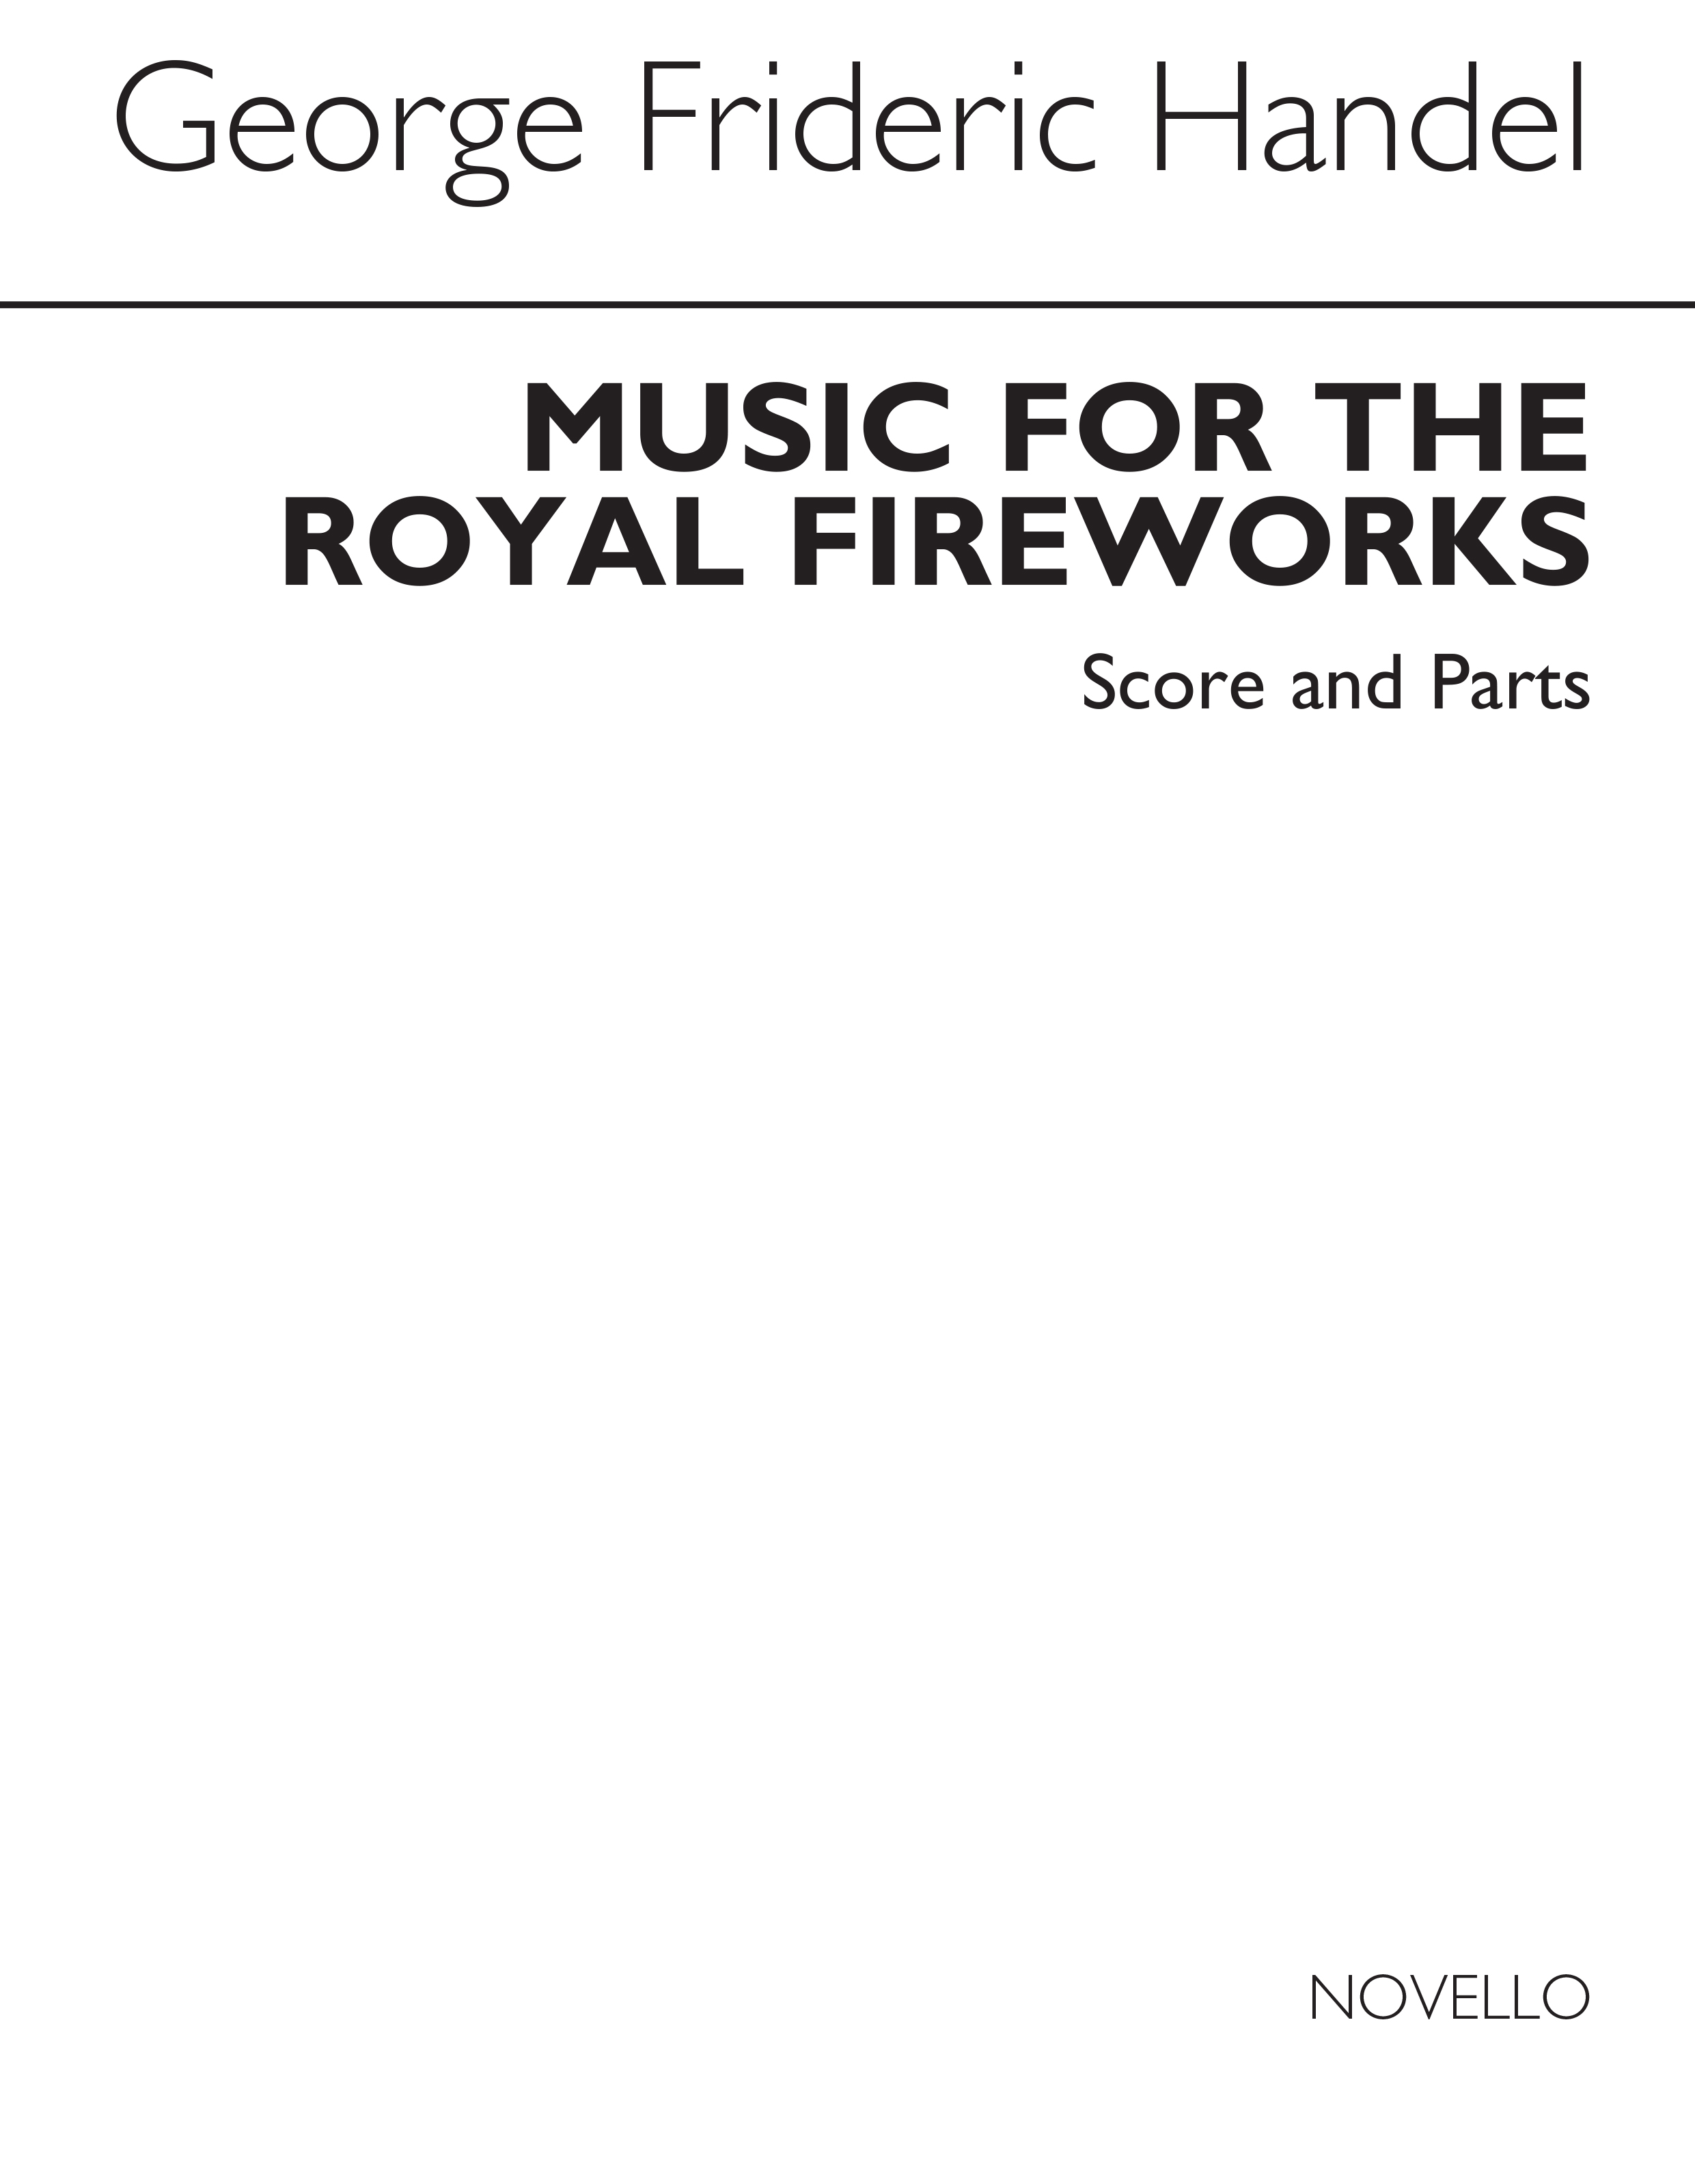 Georg Friedrich Hndel: Music For The Royal Fireworks: Orchestra: Score and